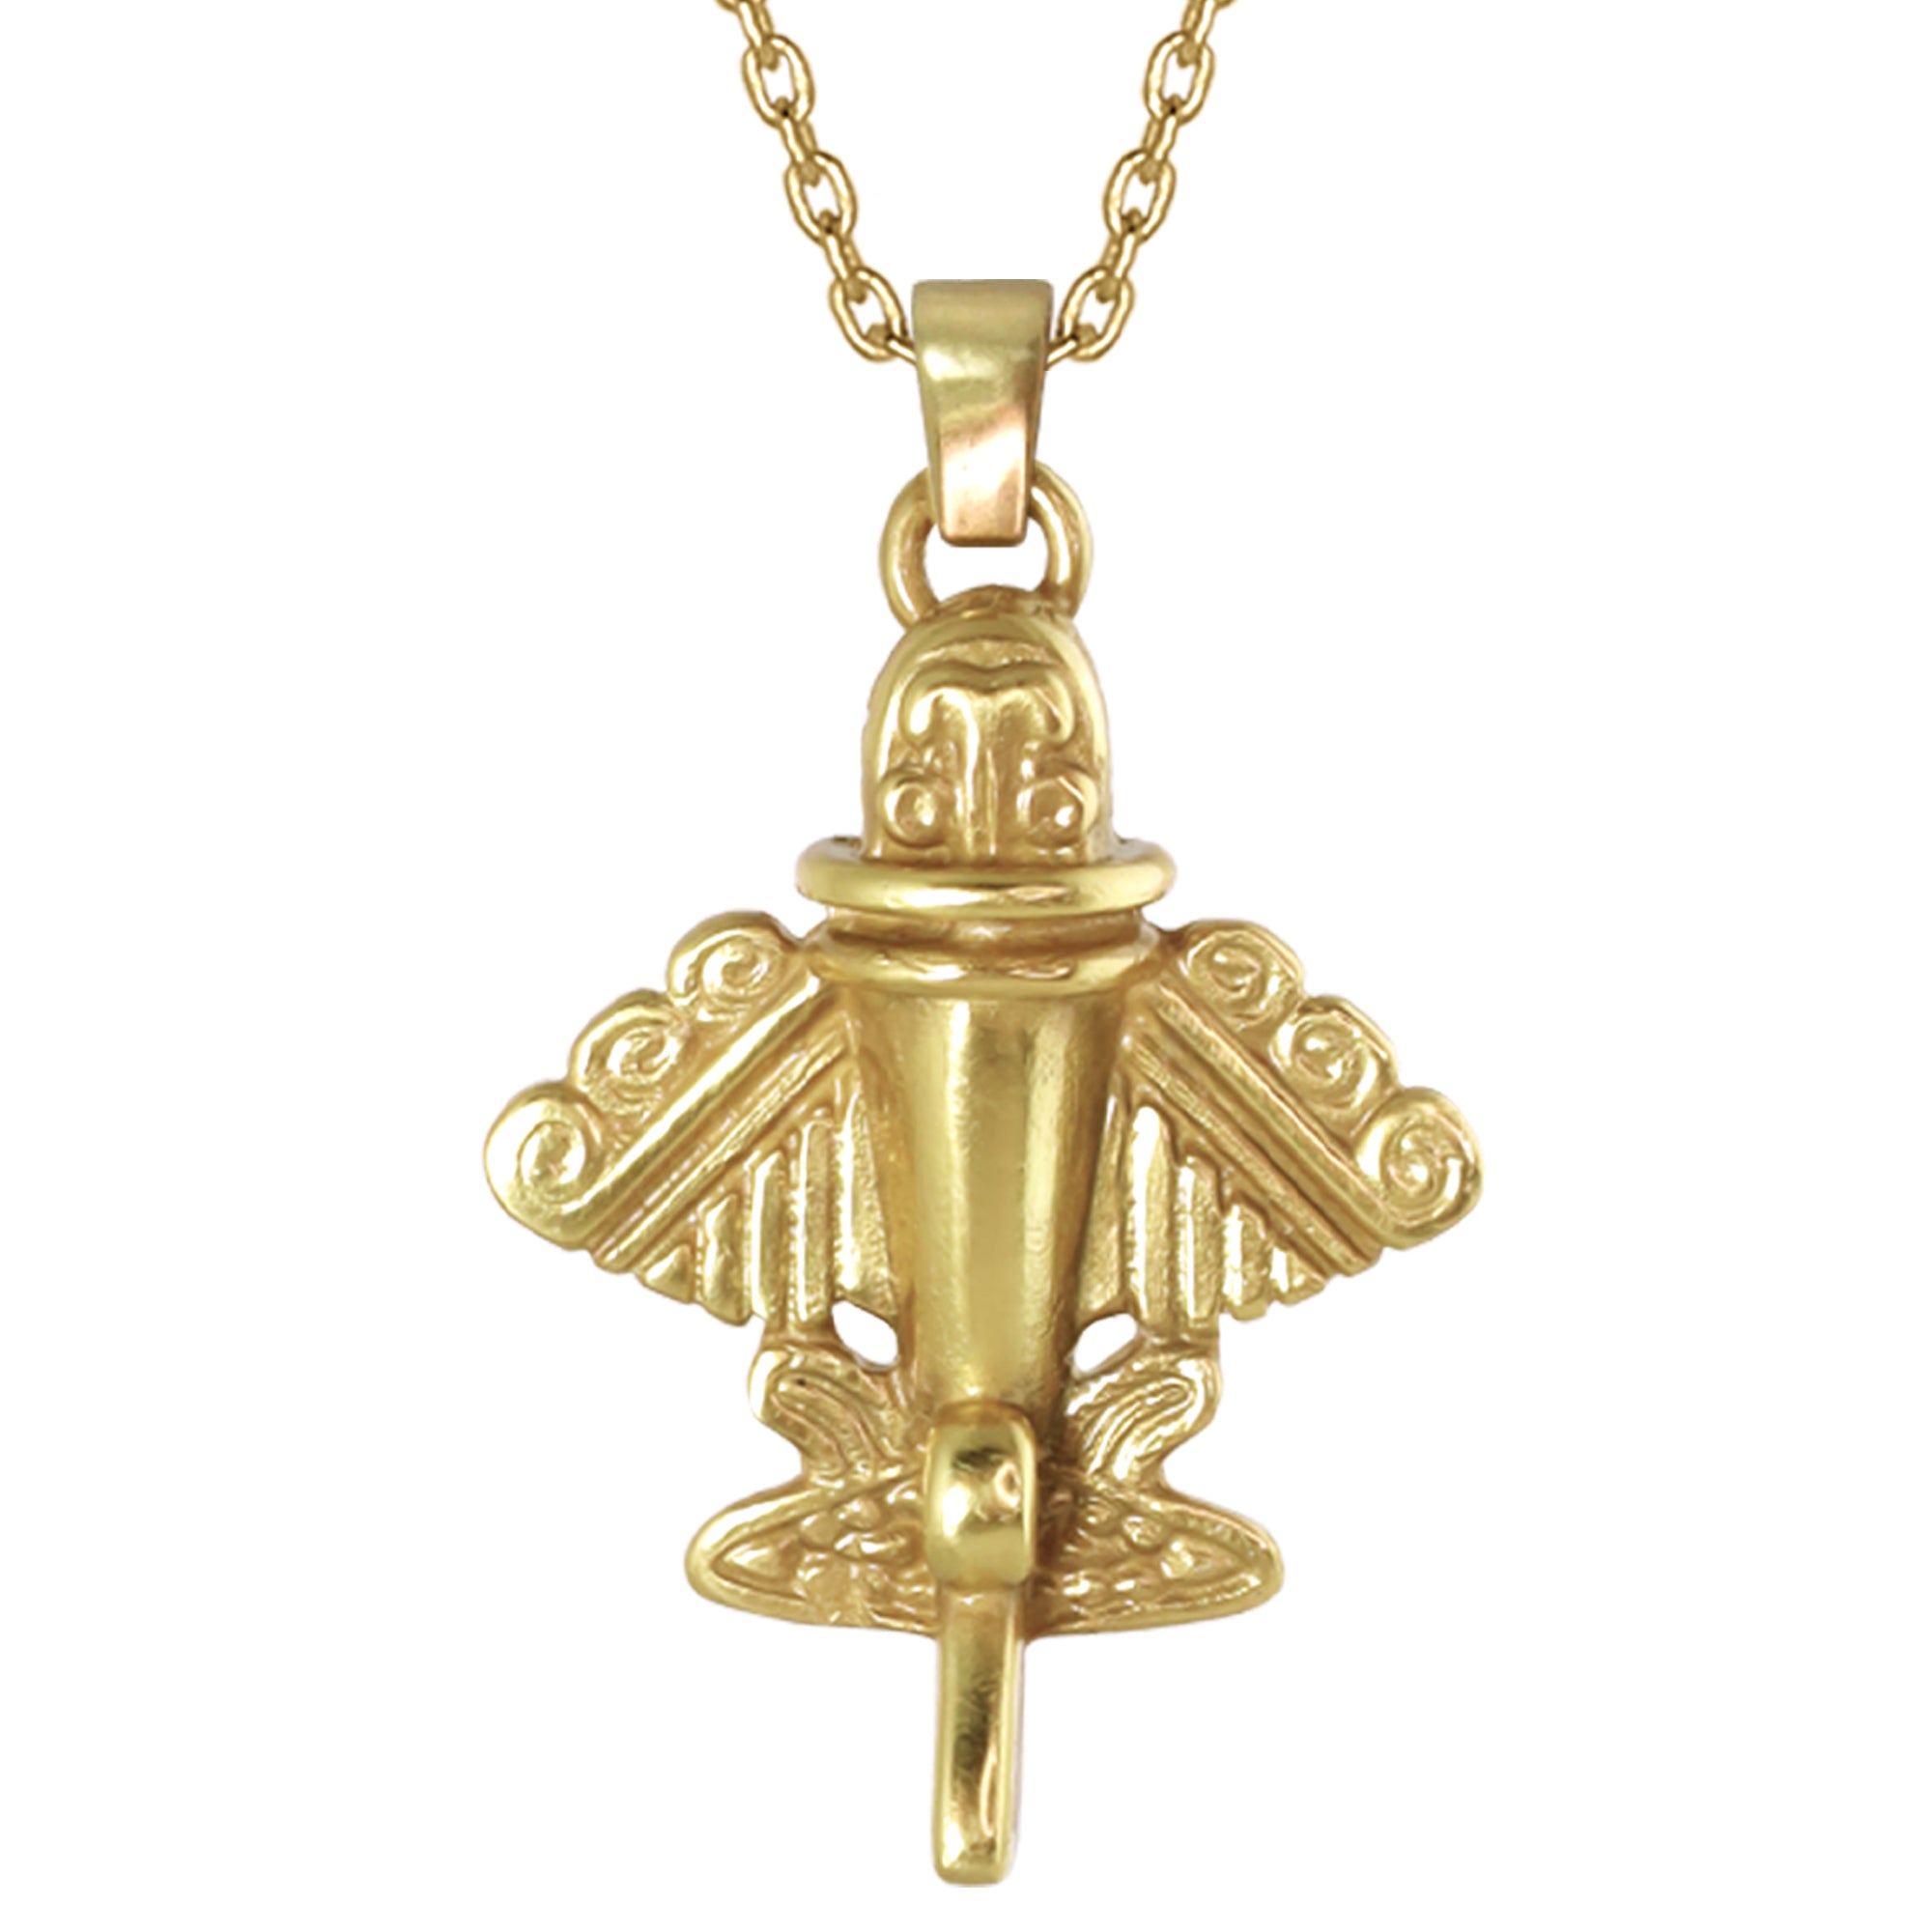 Quimbaya Flyer Golden Jet-9 18k Solid Gold Necklace by Across The Puddle